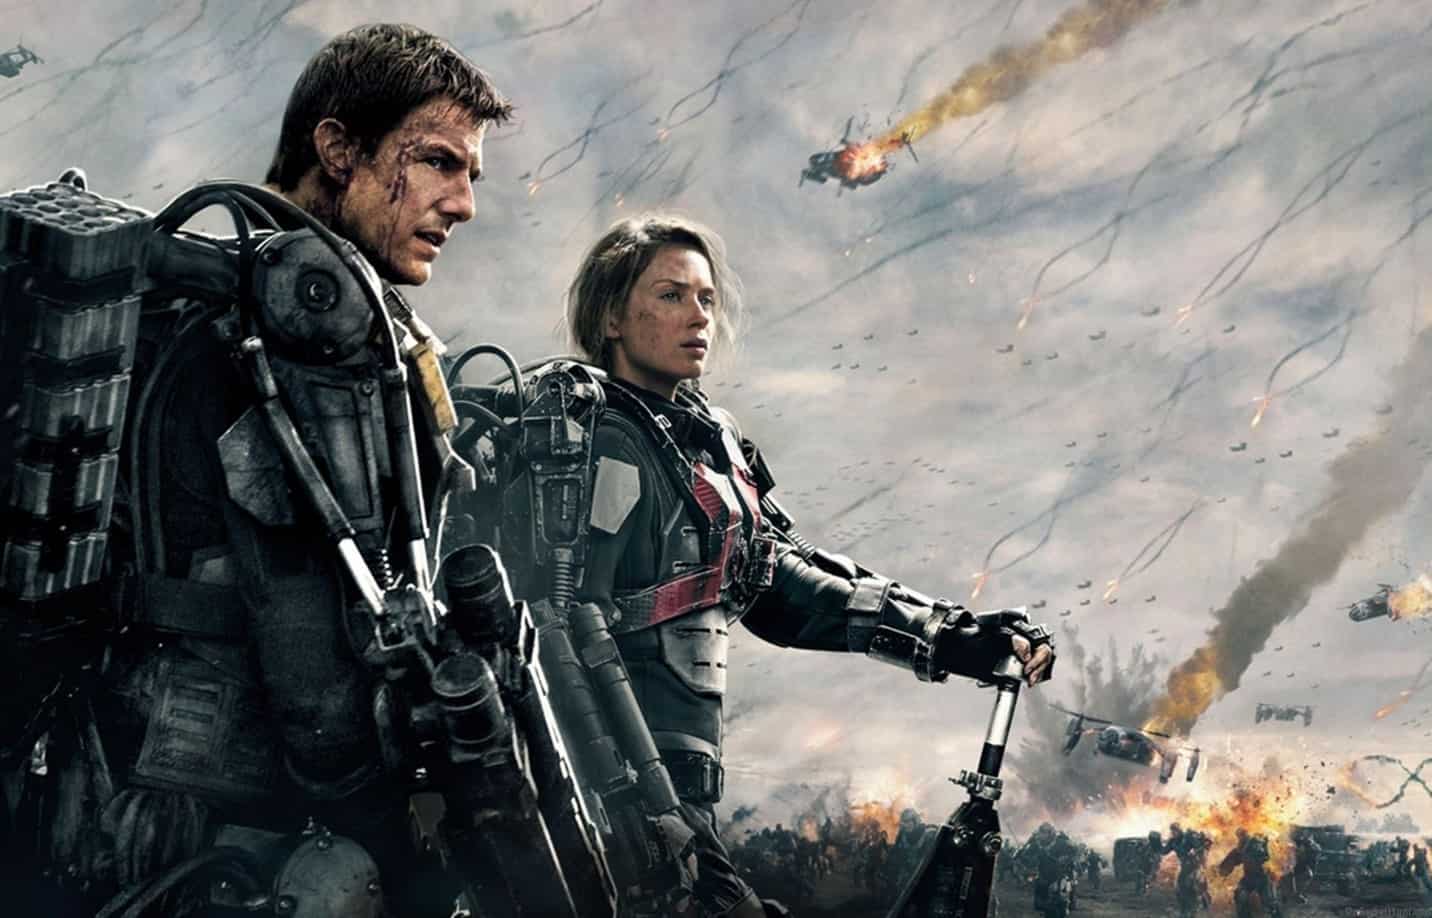 Edge of Tomorrow: A Thrilling Sci-Fi Film with Time-Loop Concept